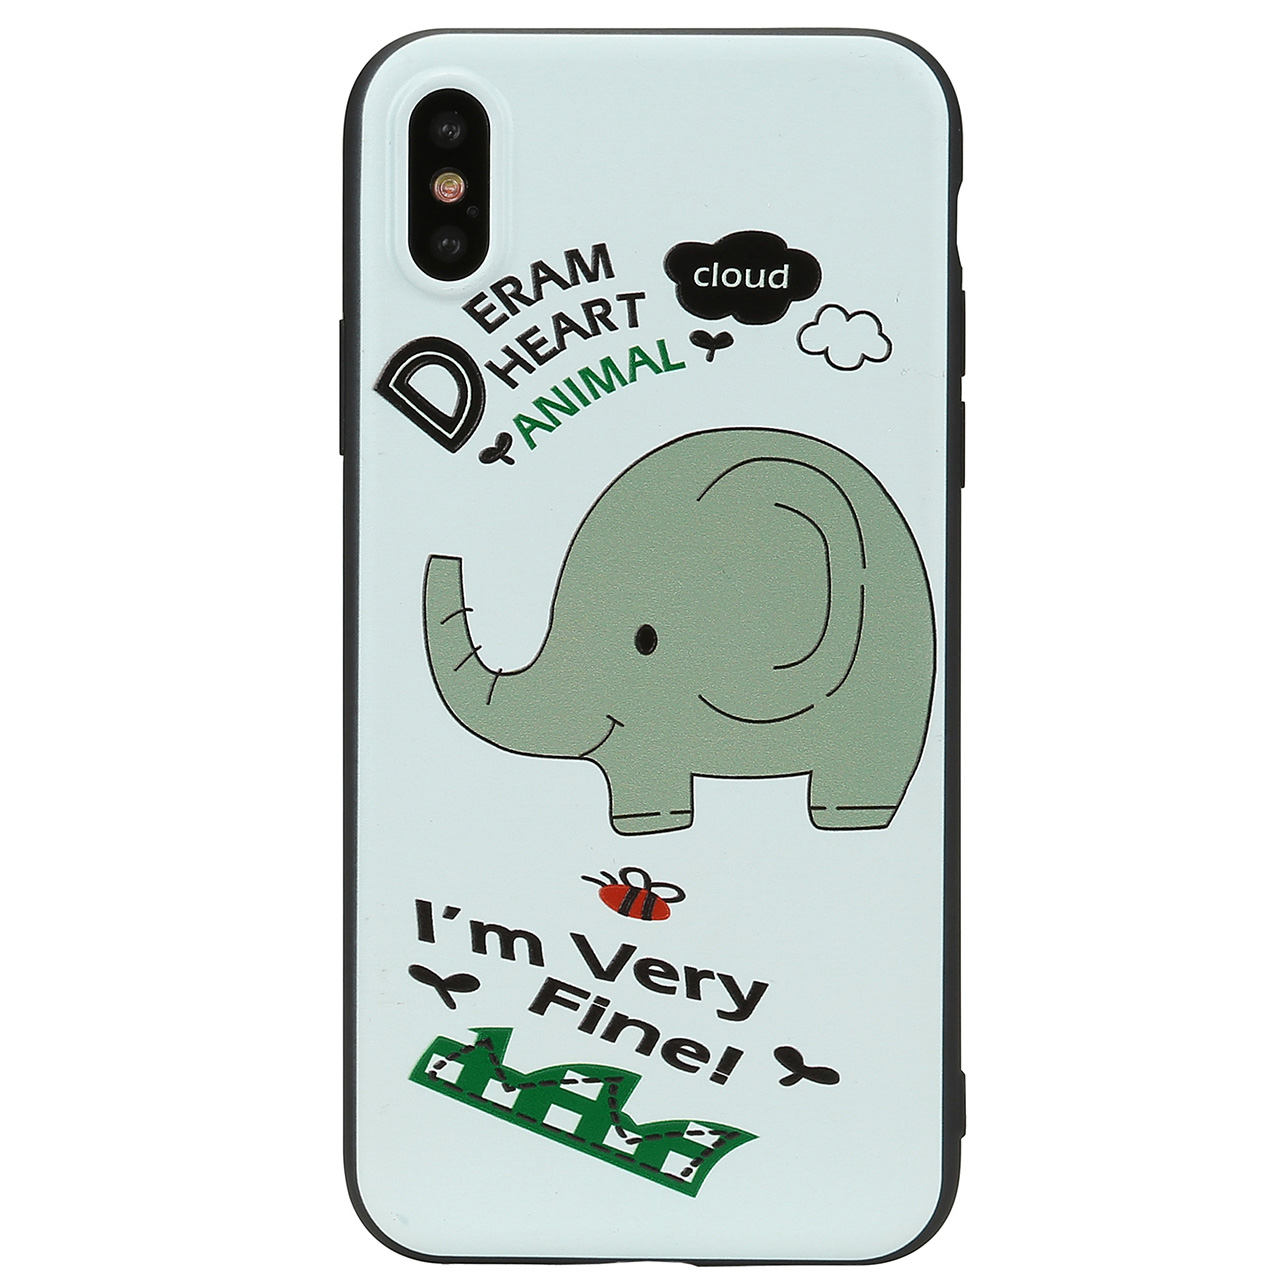 ACBungji iPhone X case Embossment Print Lightweight Soft Flexible TPU Protective Cover Case for iPhone X -Elephant